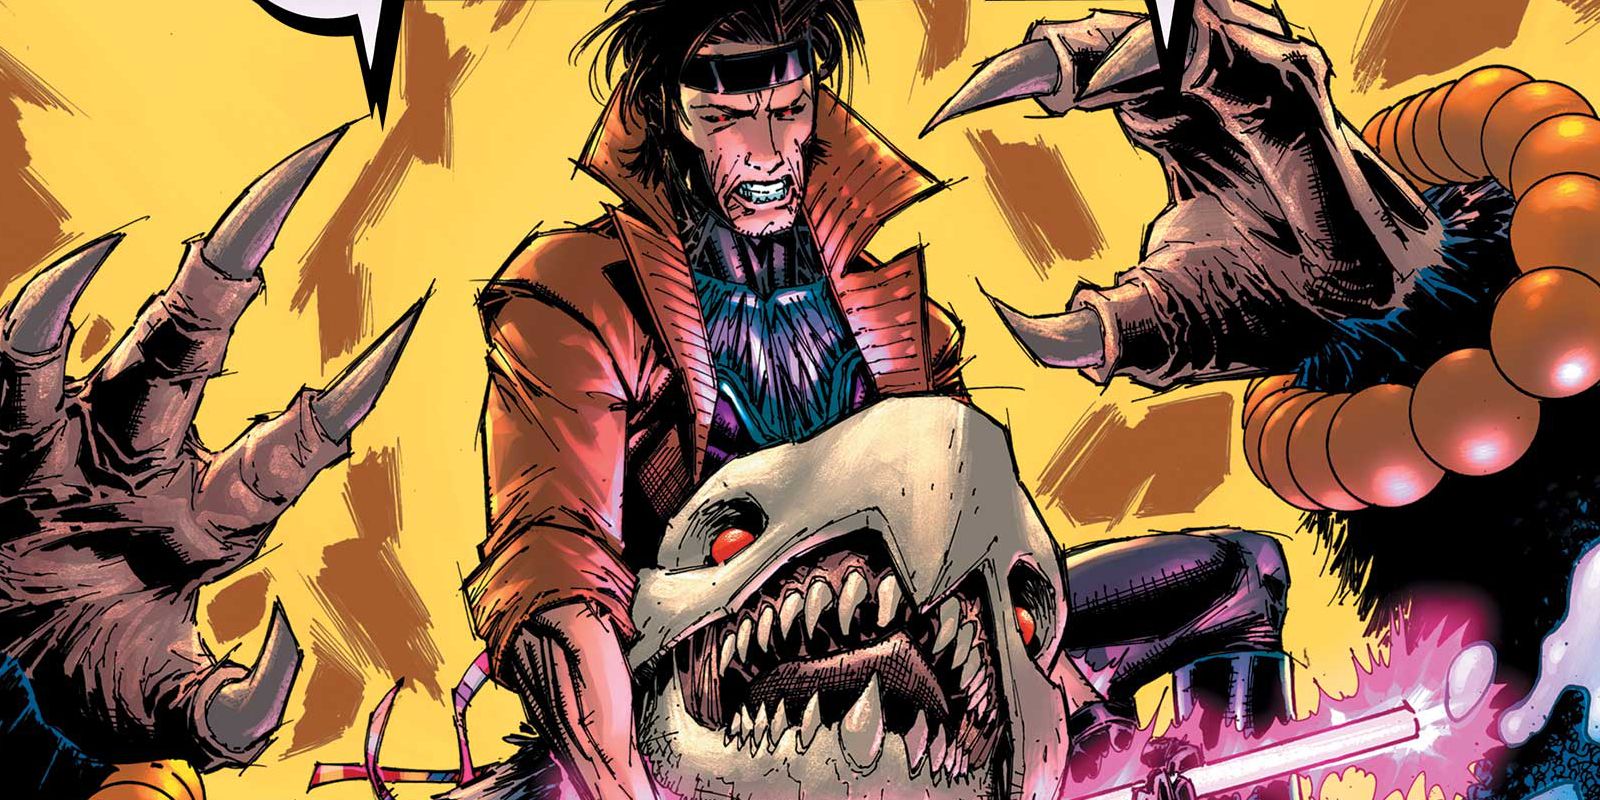 Marvel Comics' Gambit choking out a monster with his quarterstaff